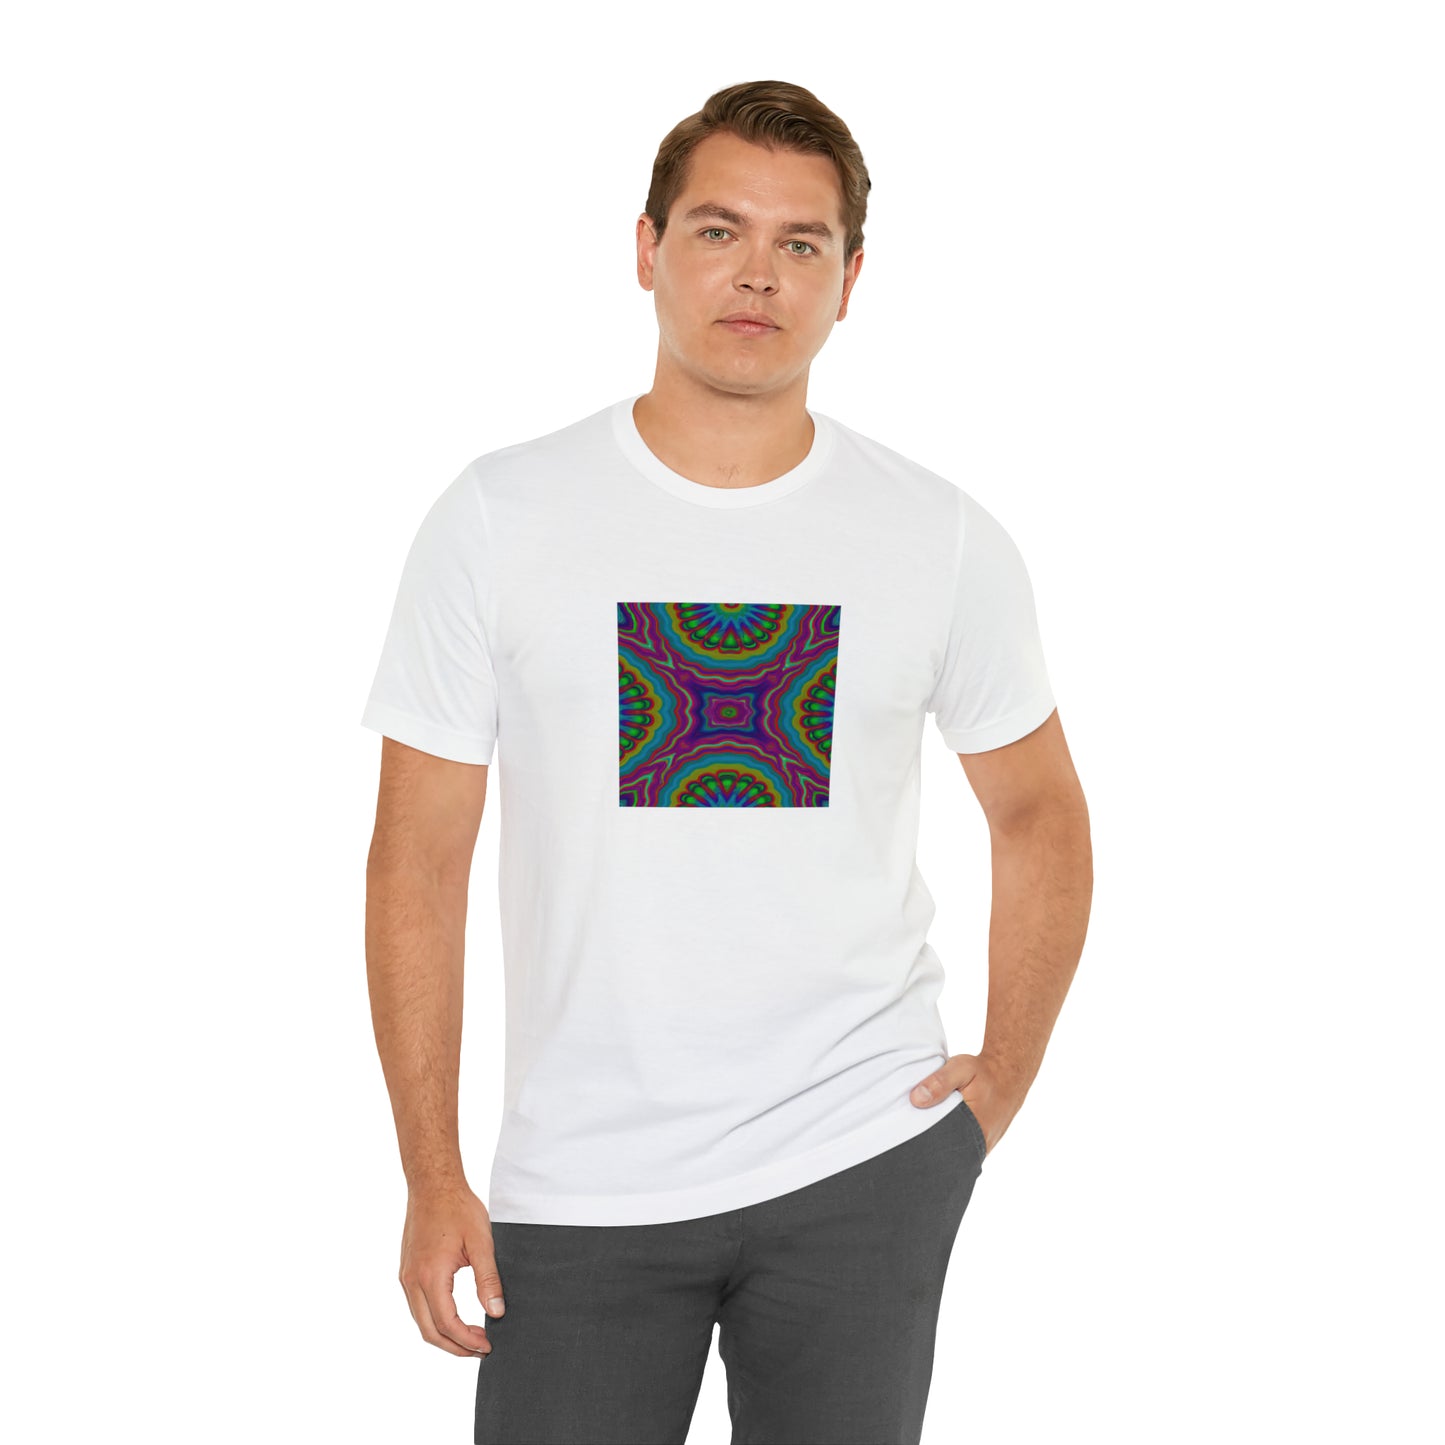 Lulu French - Psychedelic Trippy Pattern Tee Shirt